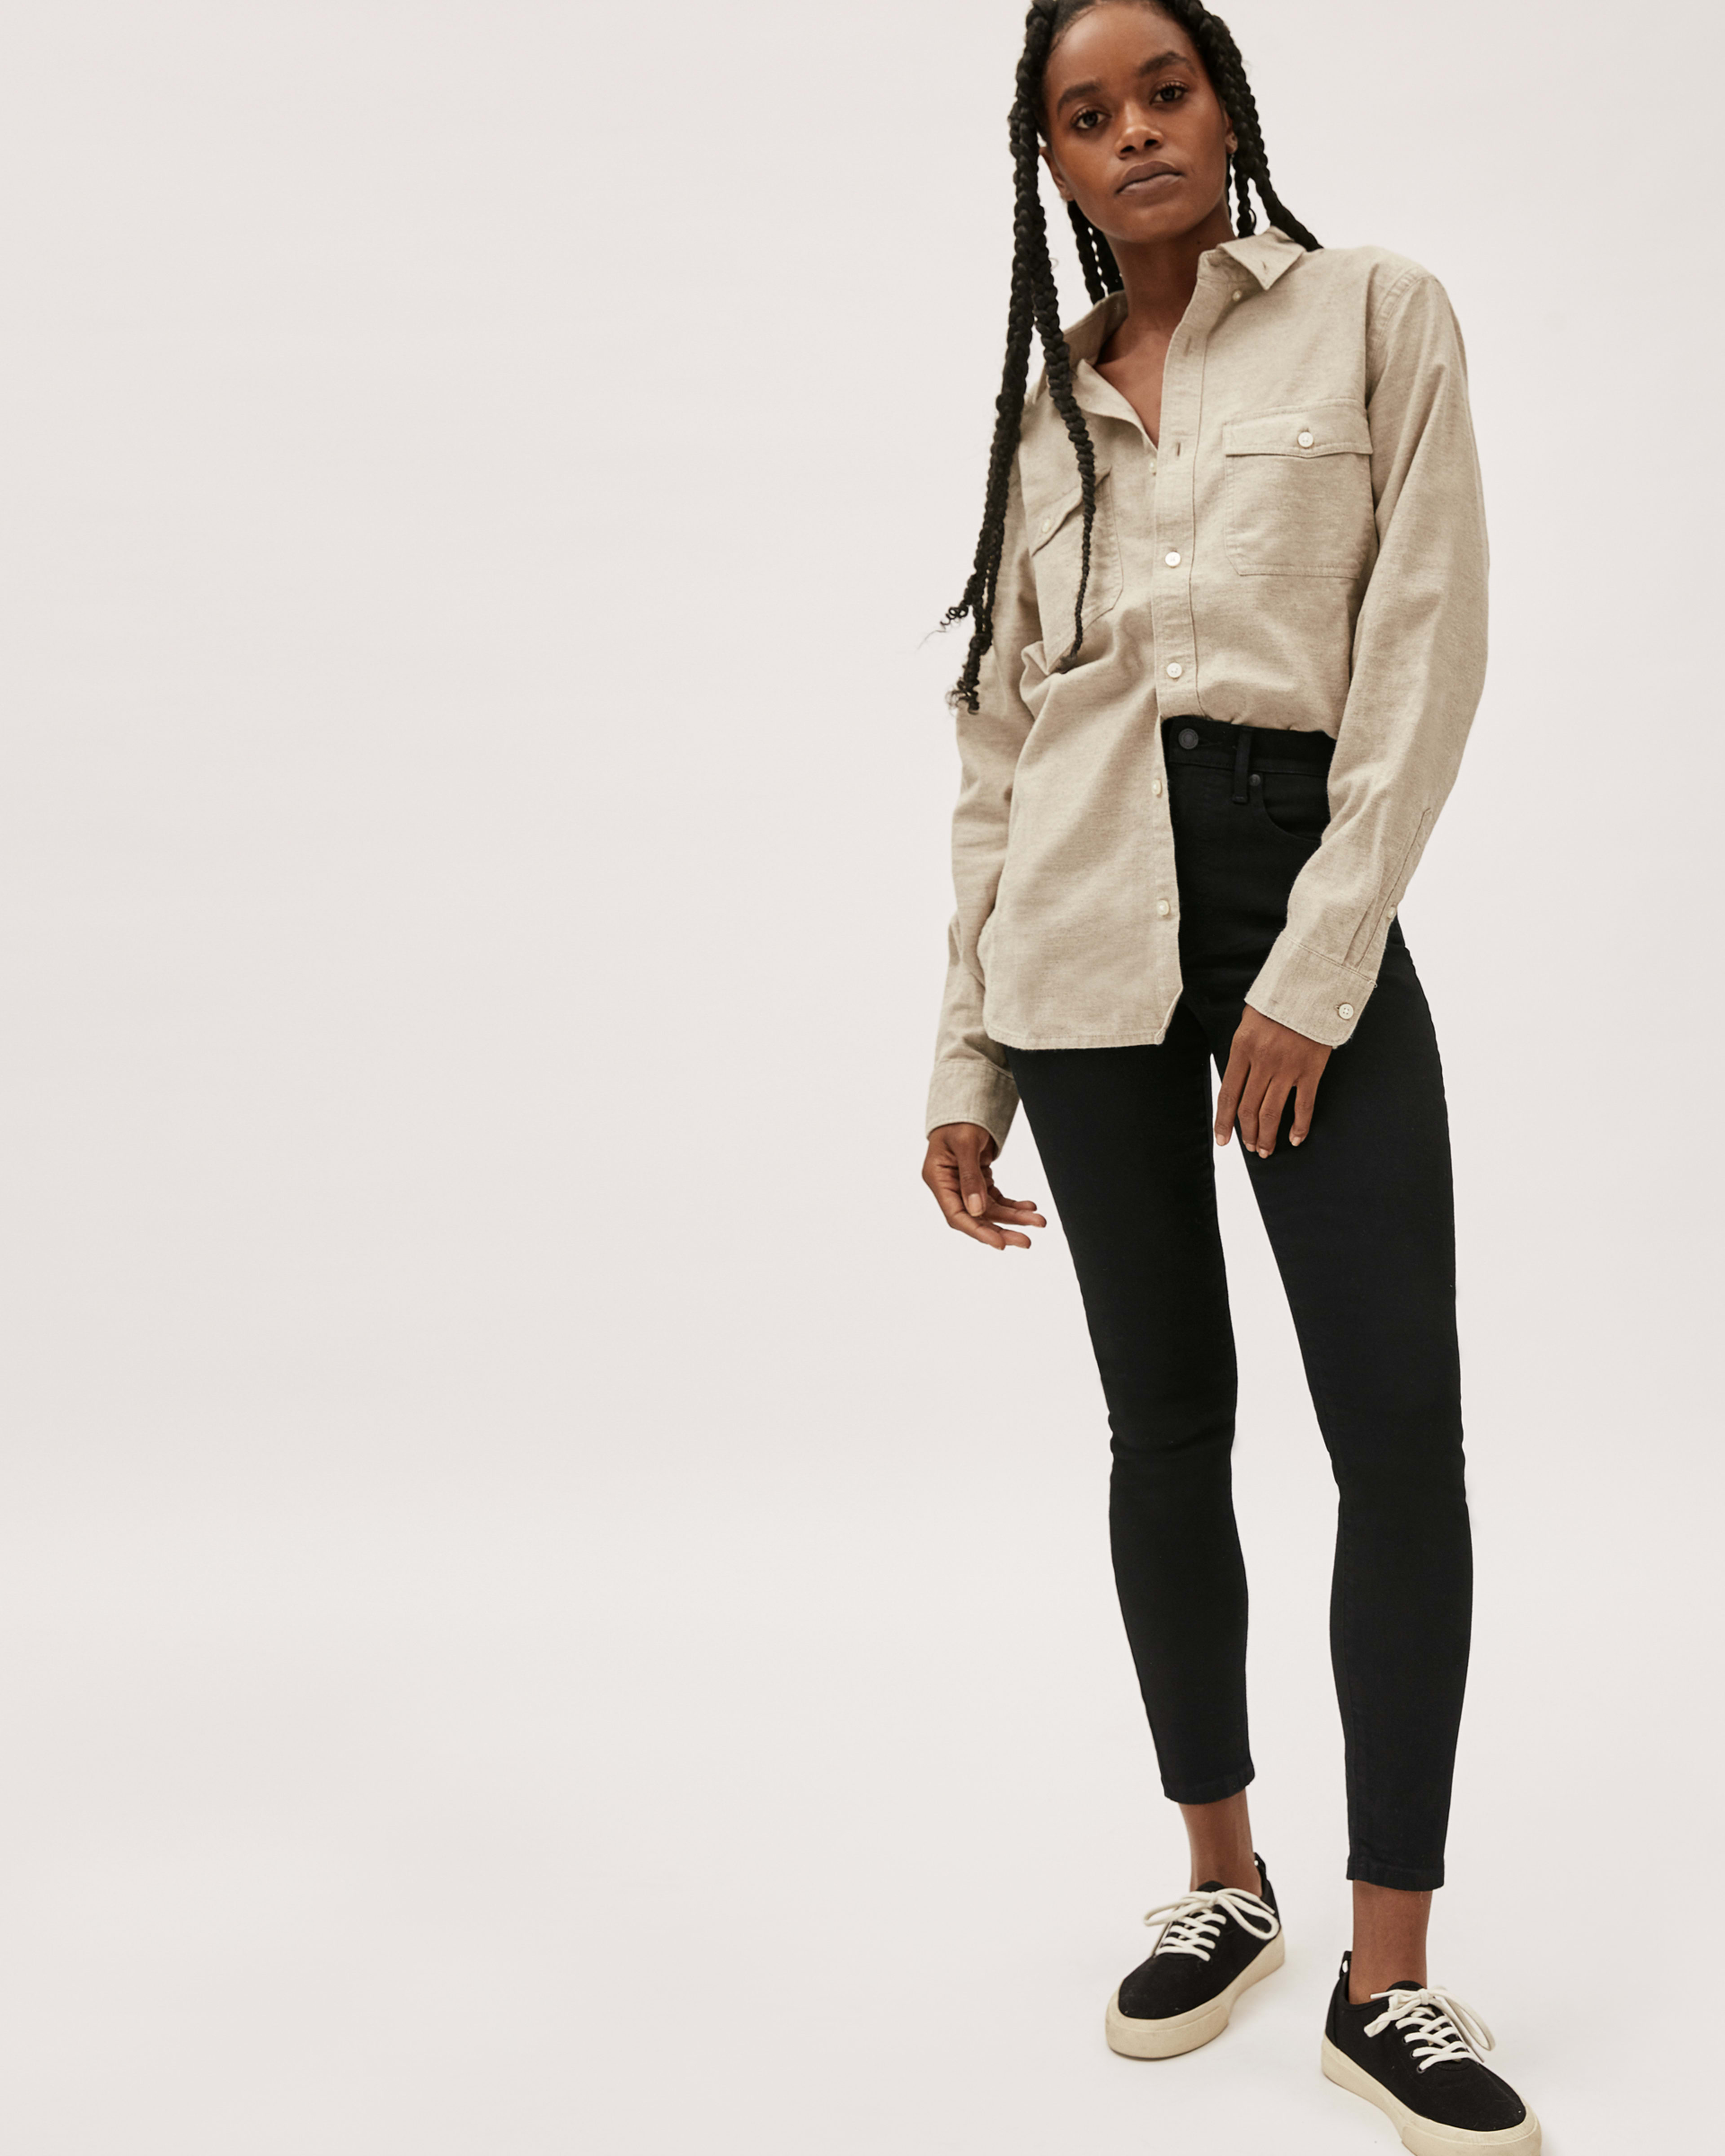 The Authentic Stretch High-Rise Skinny Black – Everlane